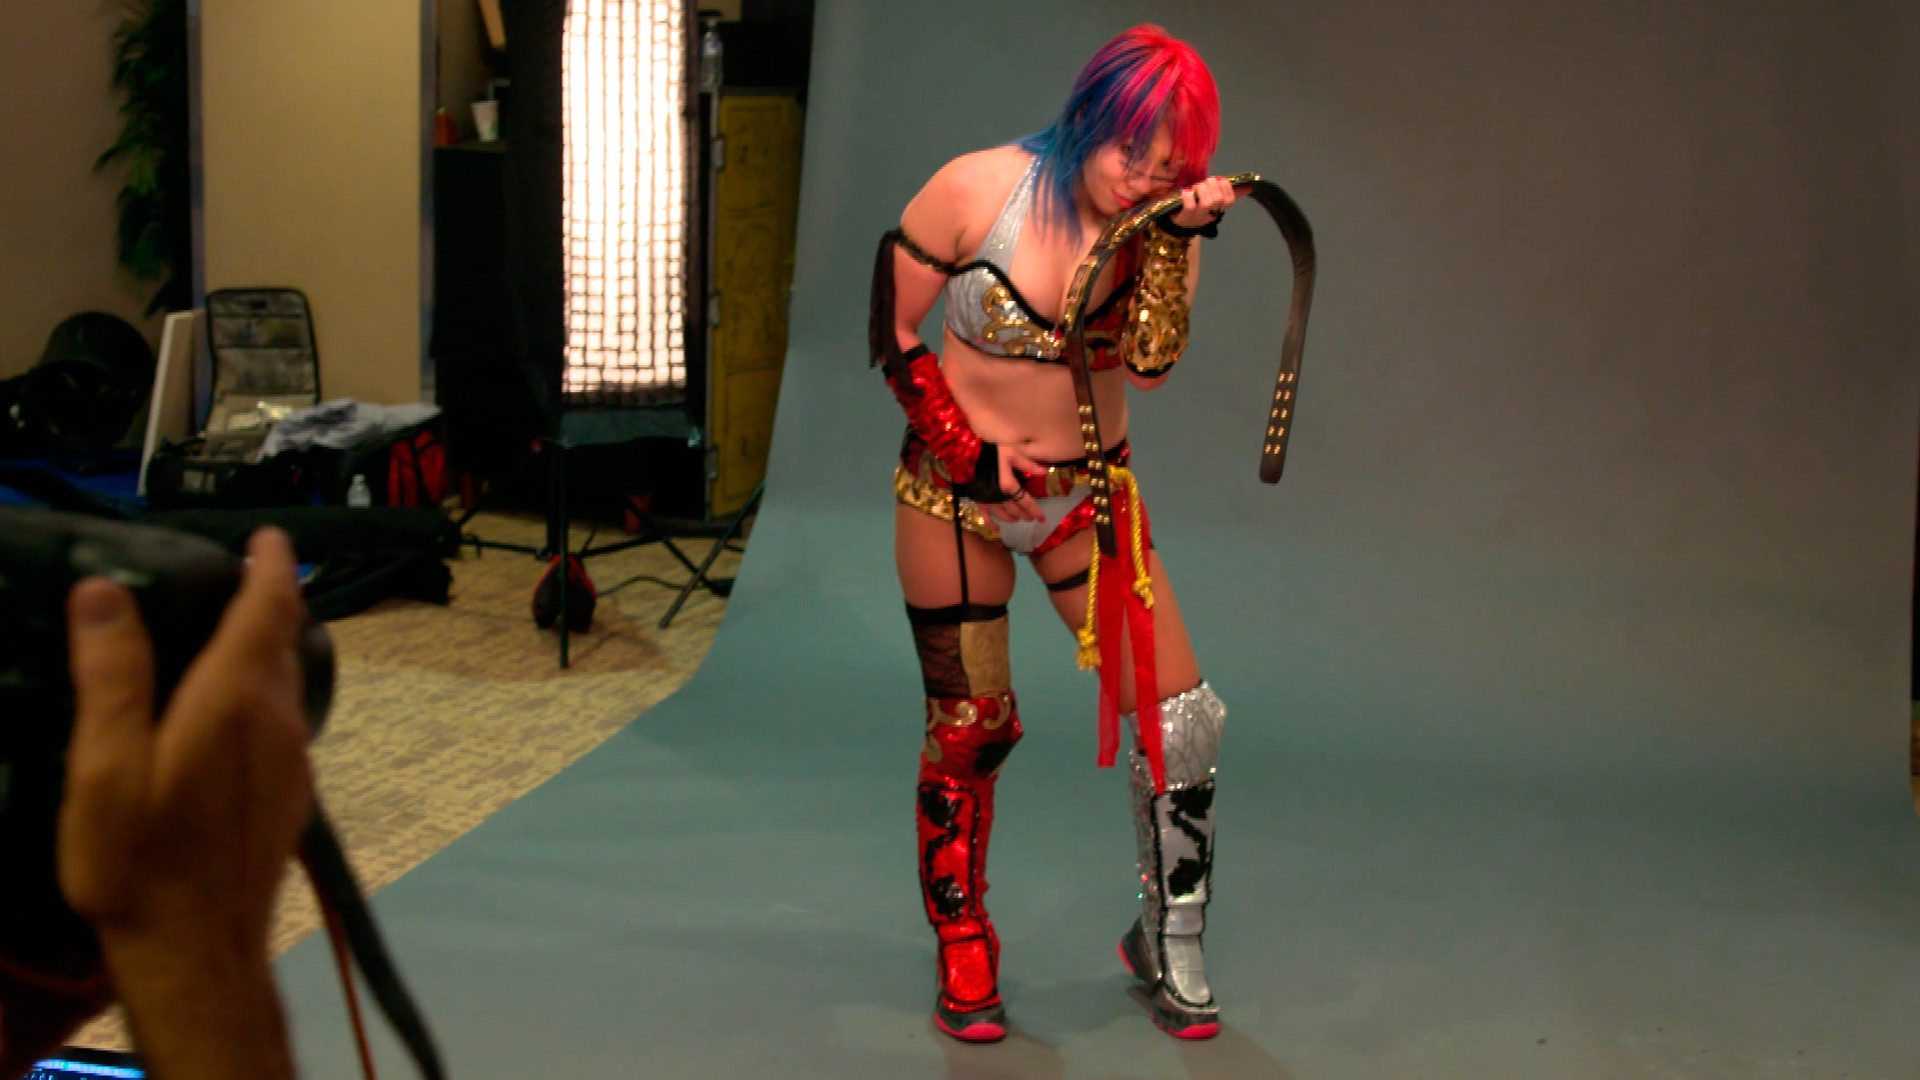 1920x1080 Asuka is photographed with the new NXT Women's Title: WWE.com 4K Exclusive,  April 1, 2017 | WWE